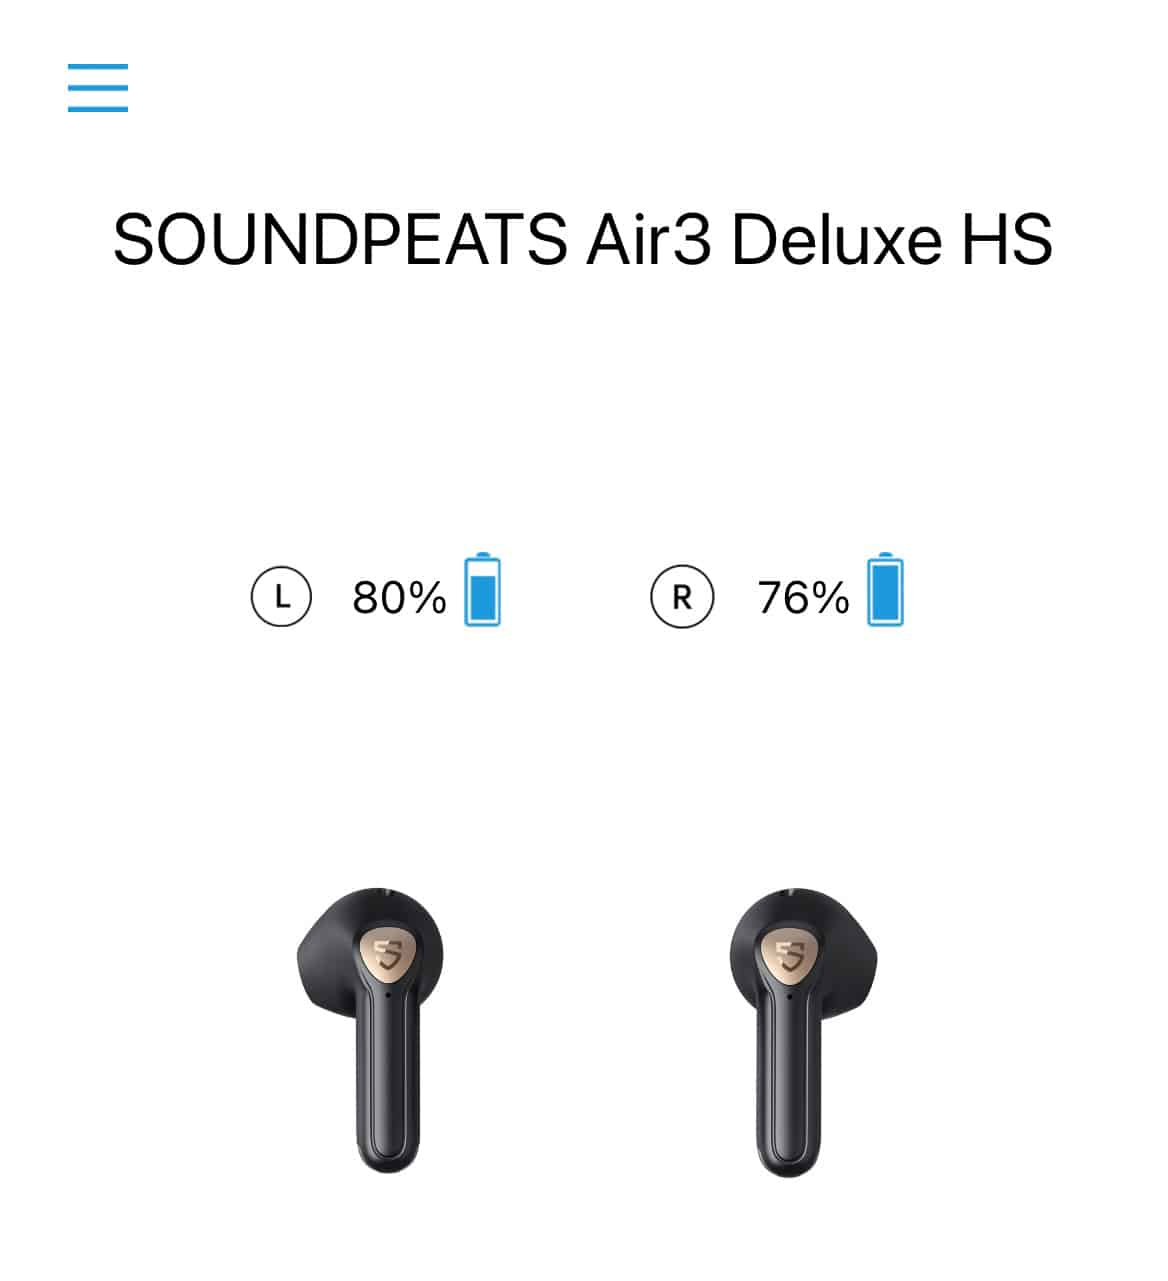 SOUNDPEATS Air3 Deluxe HSのレビュー